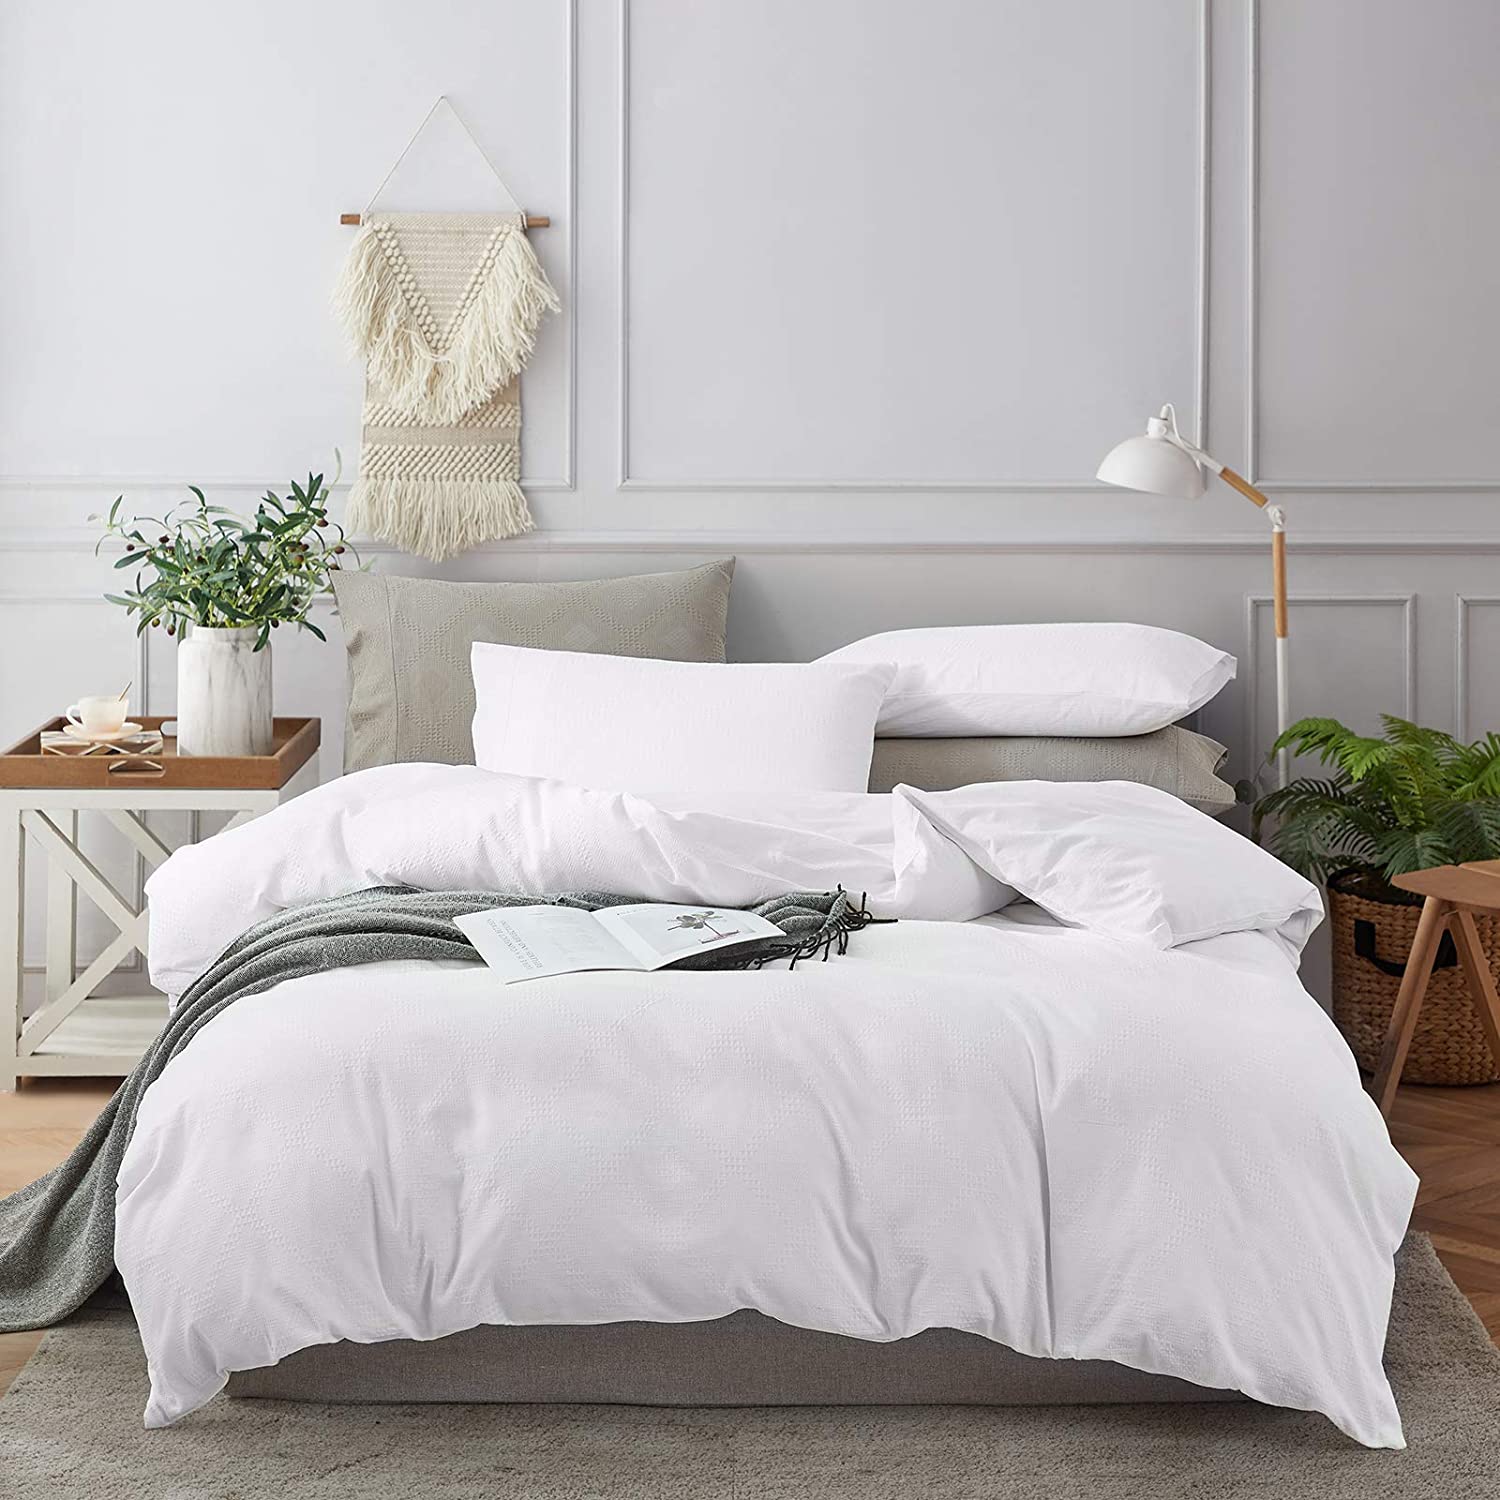 Price:$49.99  Cover Queen, 100% Cotton 3 Piece Bedding Sets, Luxury Solid Color Waffle Plaid, Ultra Soft and Breathable with Zipper Closure & Corner Ties (Queen,White) : Home & Kitchen